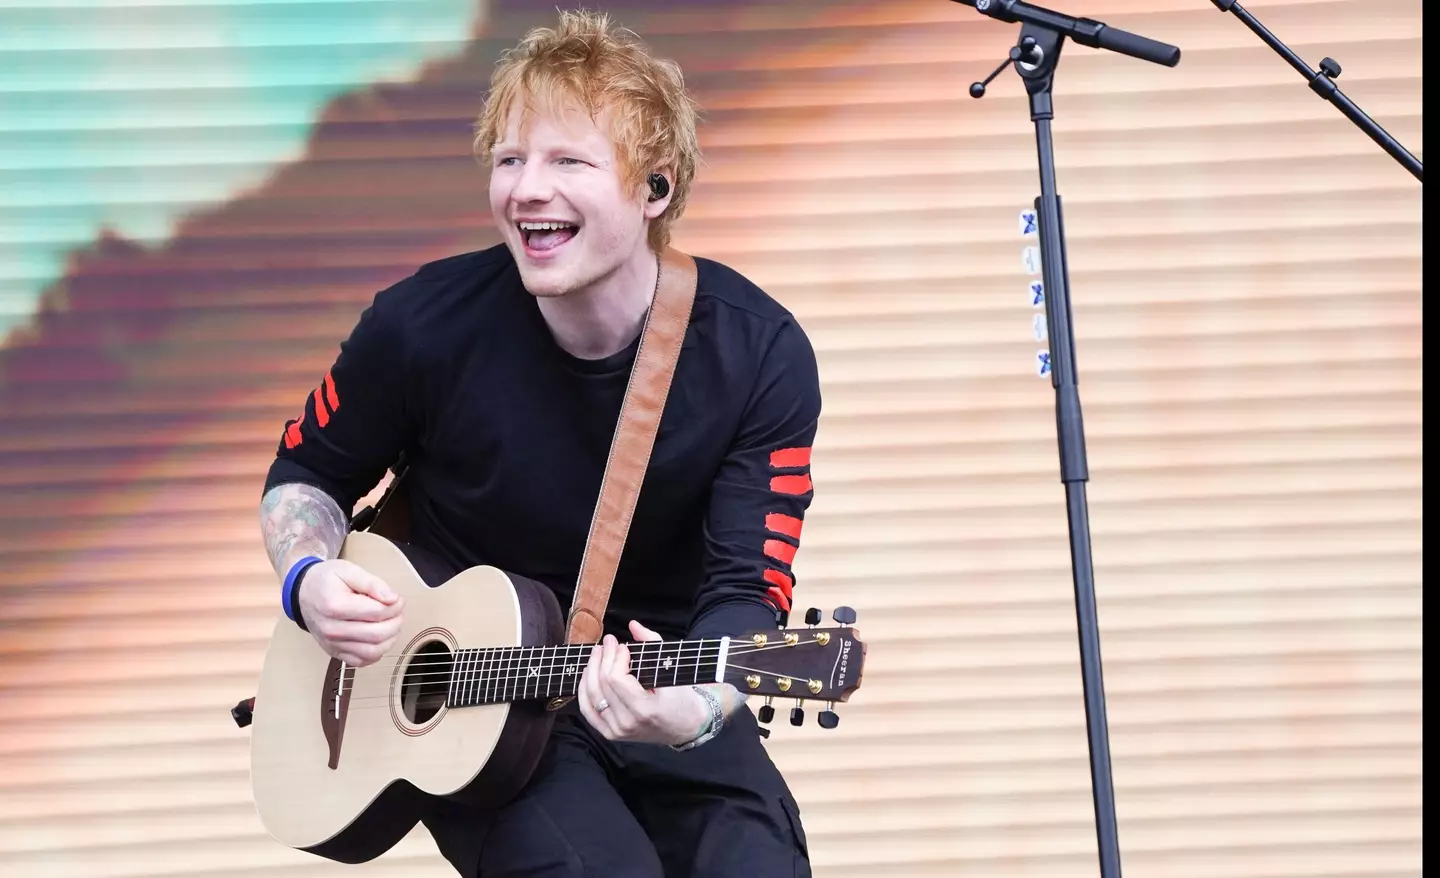 Ed Sheeran had to rush to another gig 200 miles away after performing in London on Sunday, 12 June.